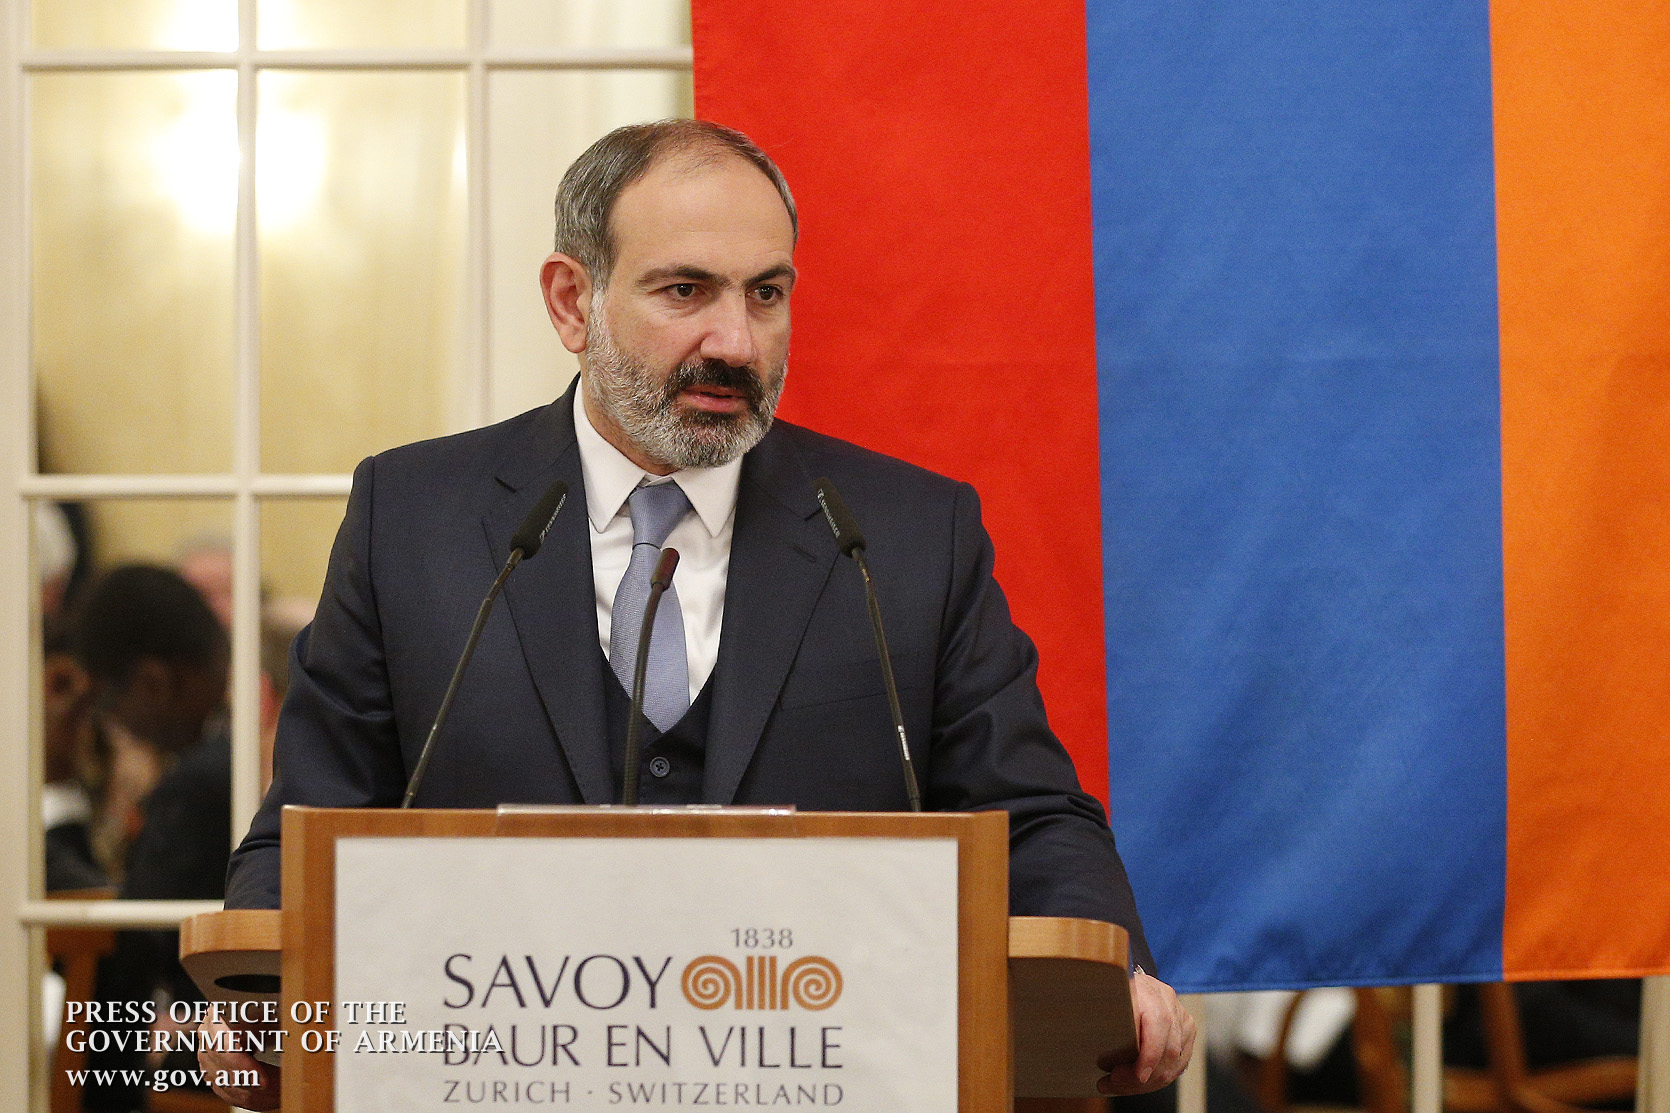 ‘If you are ready to make your move, come to Armenia, get rich and enrich’ – Nikol Pashinyan meets with Swiss businessmen in Zurich